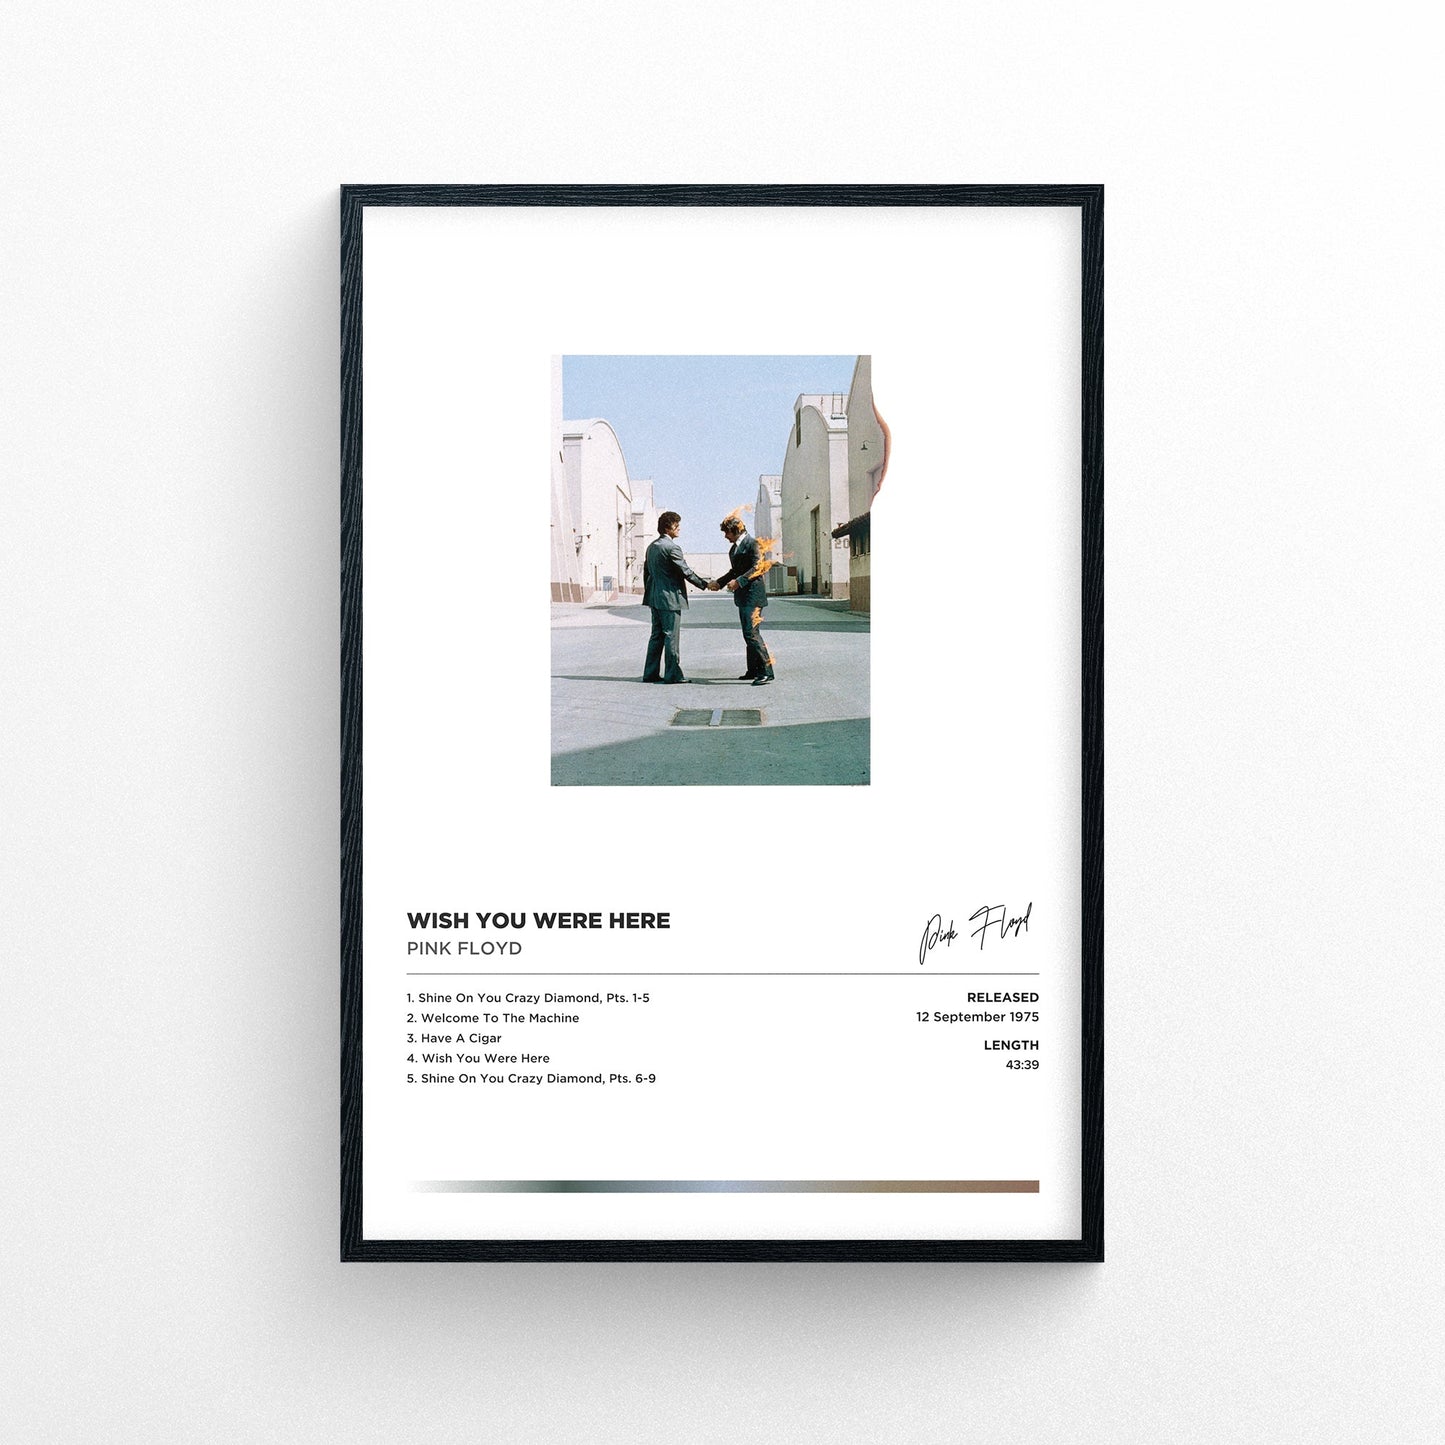 Pink Floyd - Wish You Were Here Poster Print - Framed Options Available | Polaroid Style | Album Cover Artwork